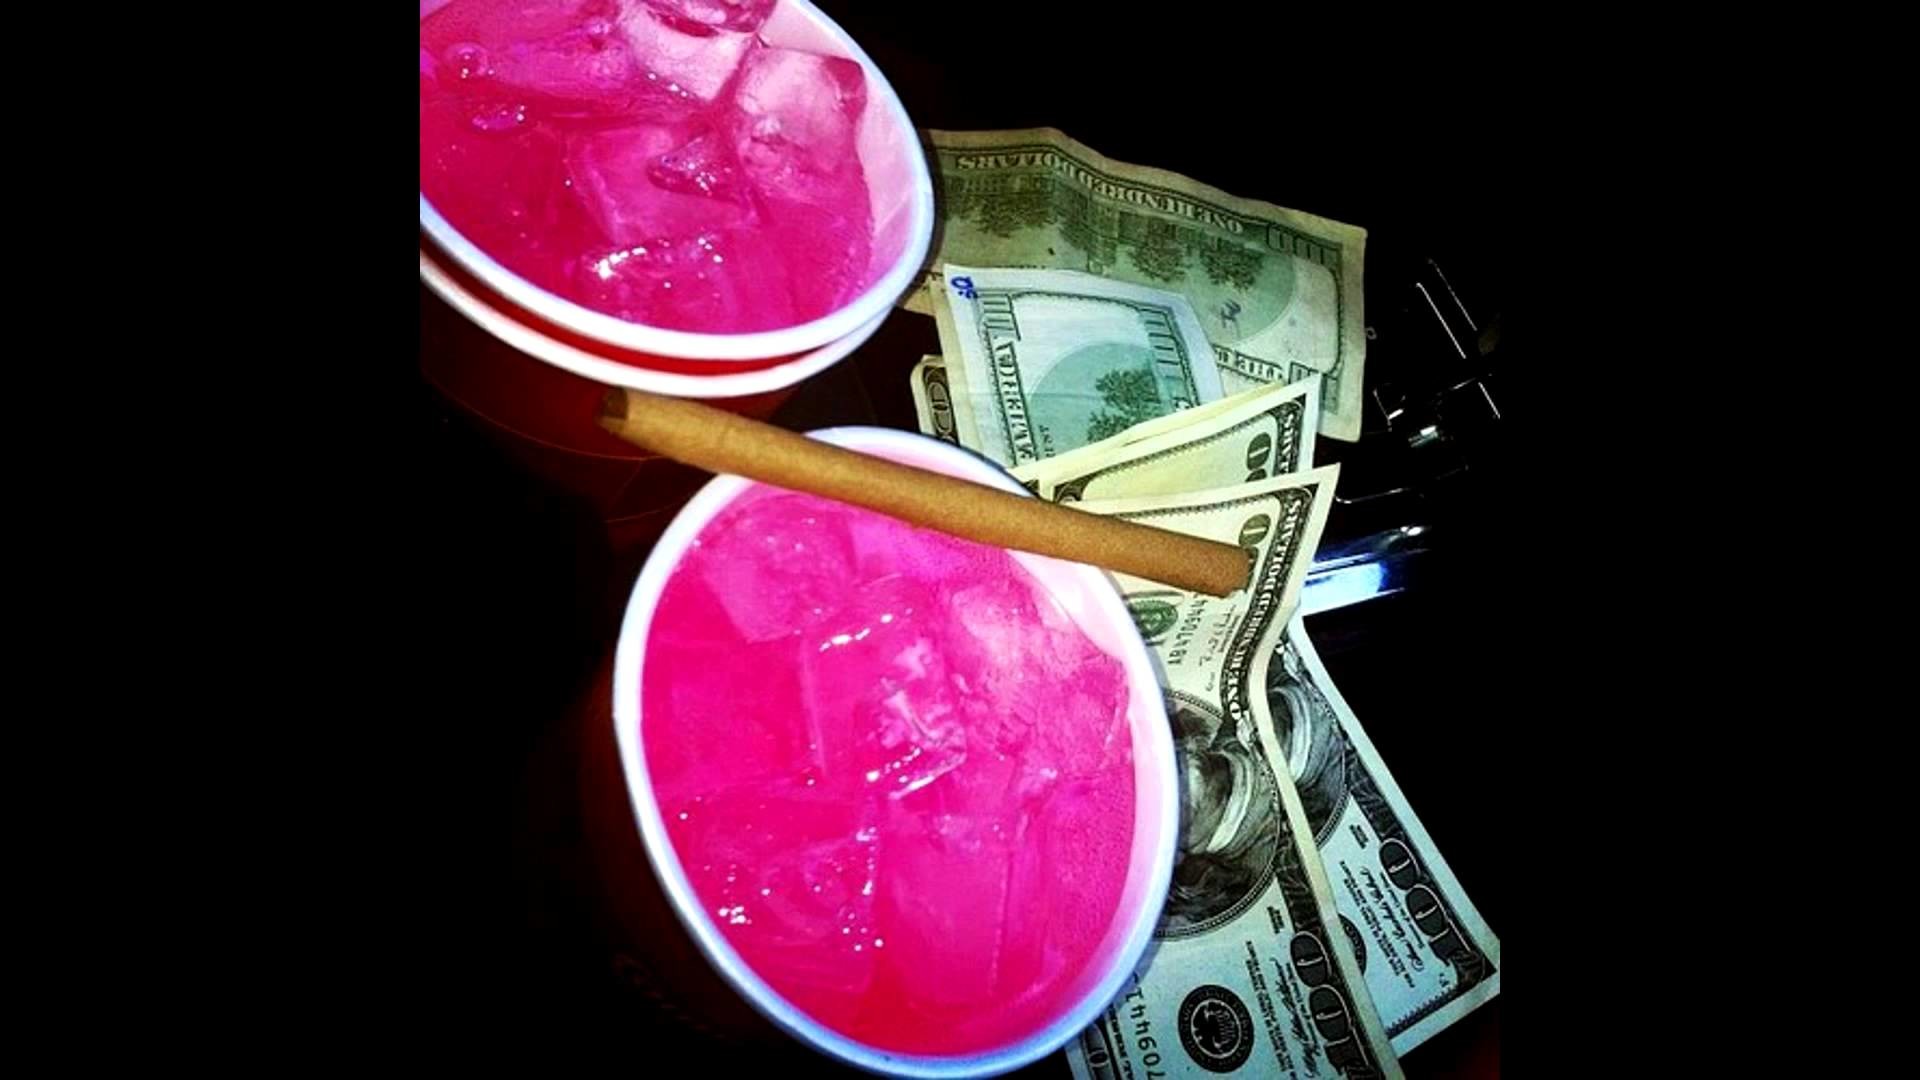 1920x1080 The 25 best Sippin lean ideas on Pinterest | Codeine cups, Dope .